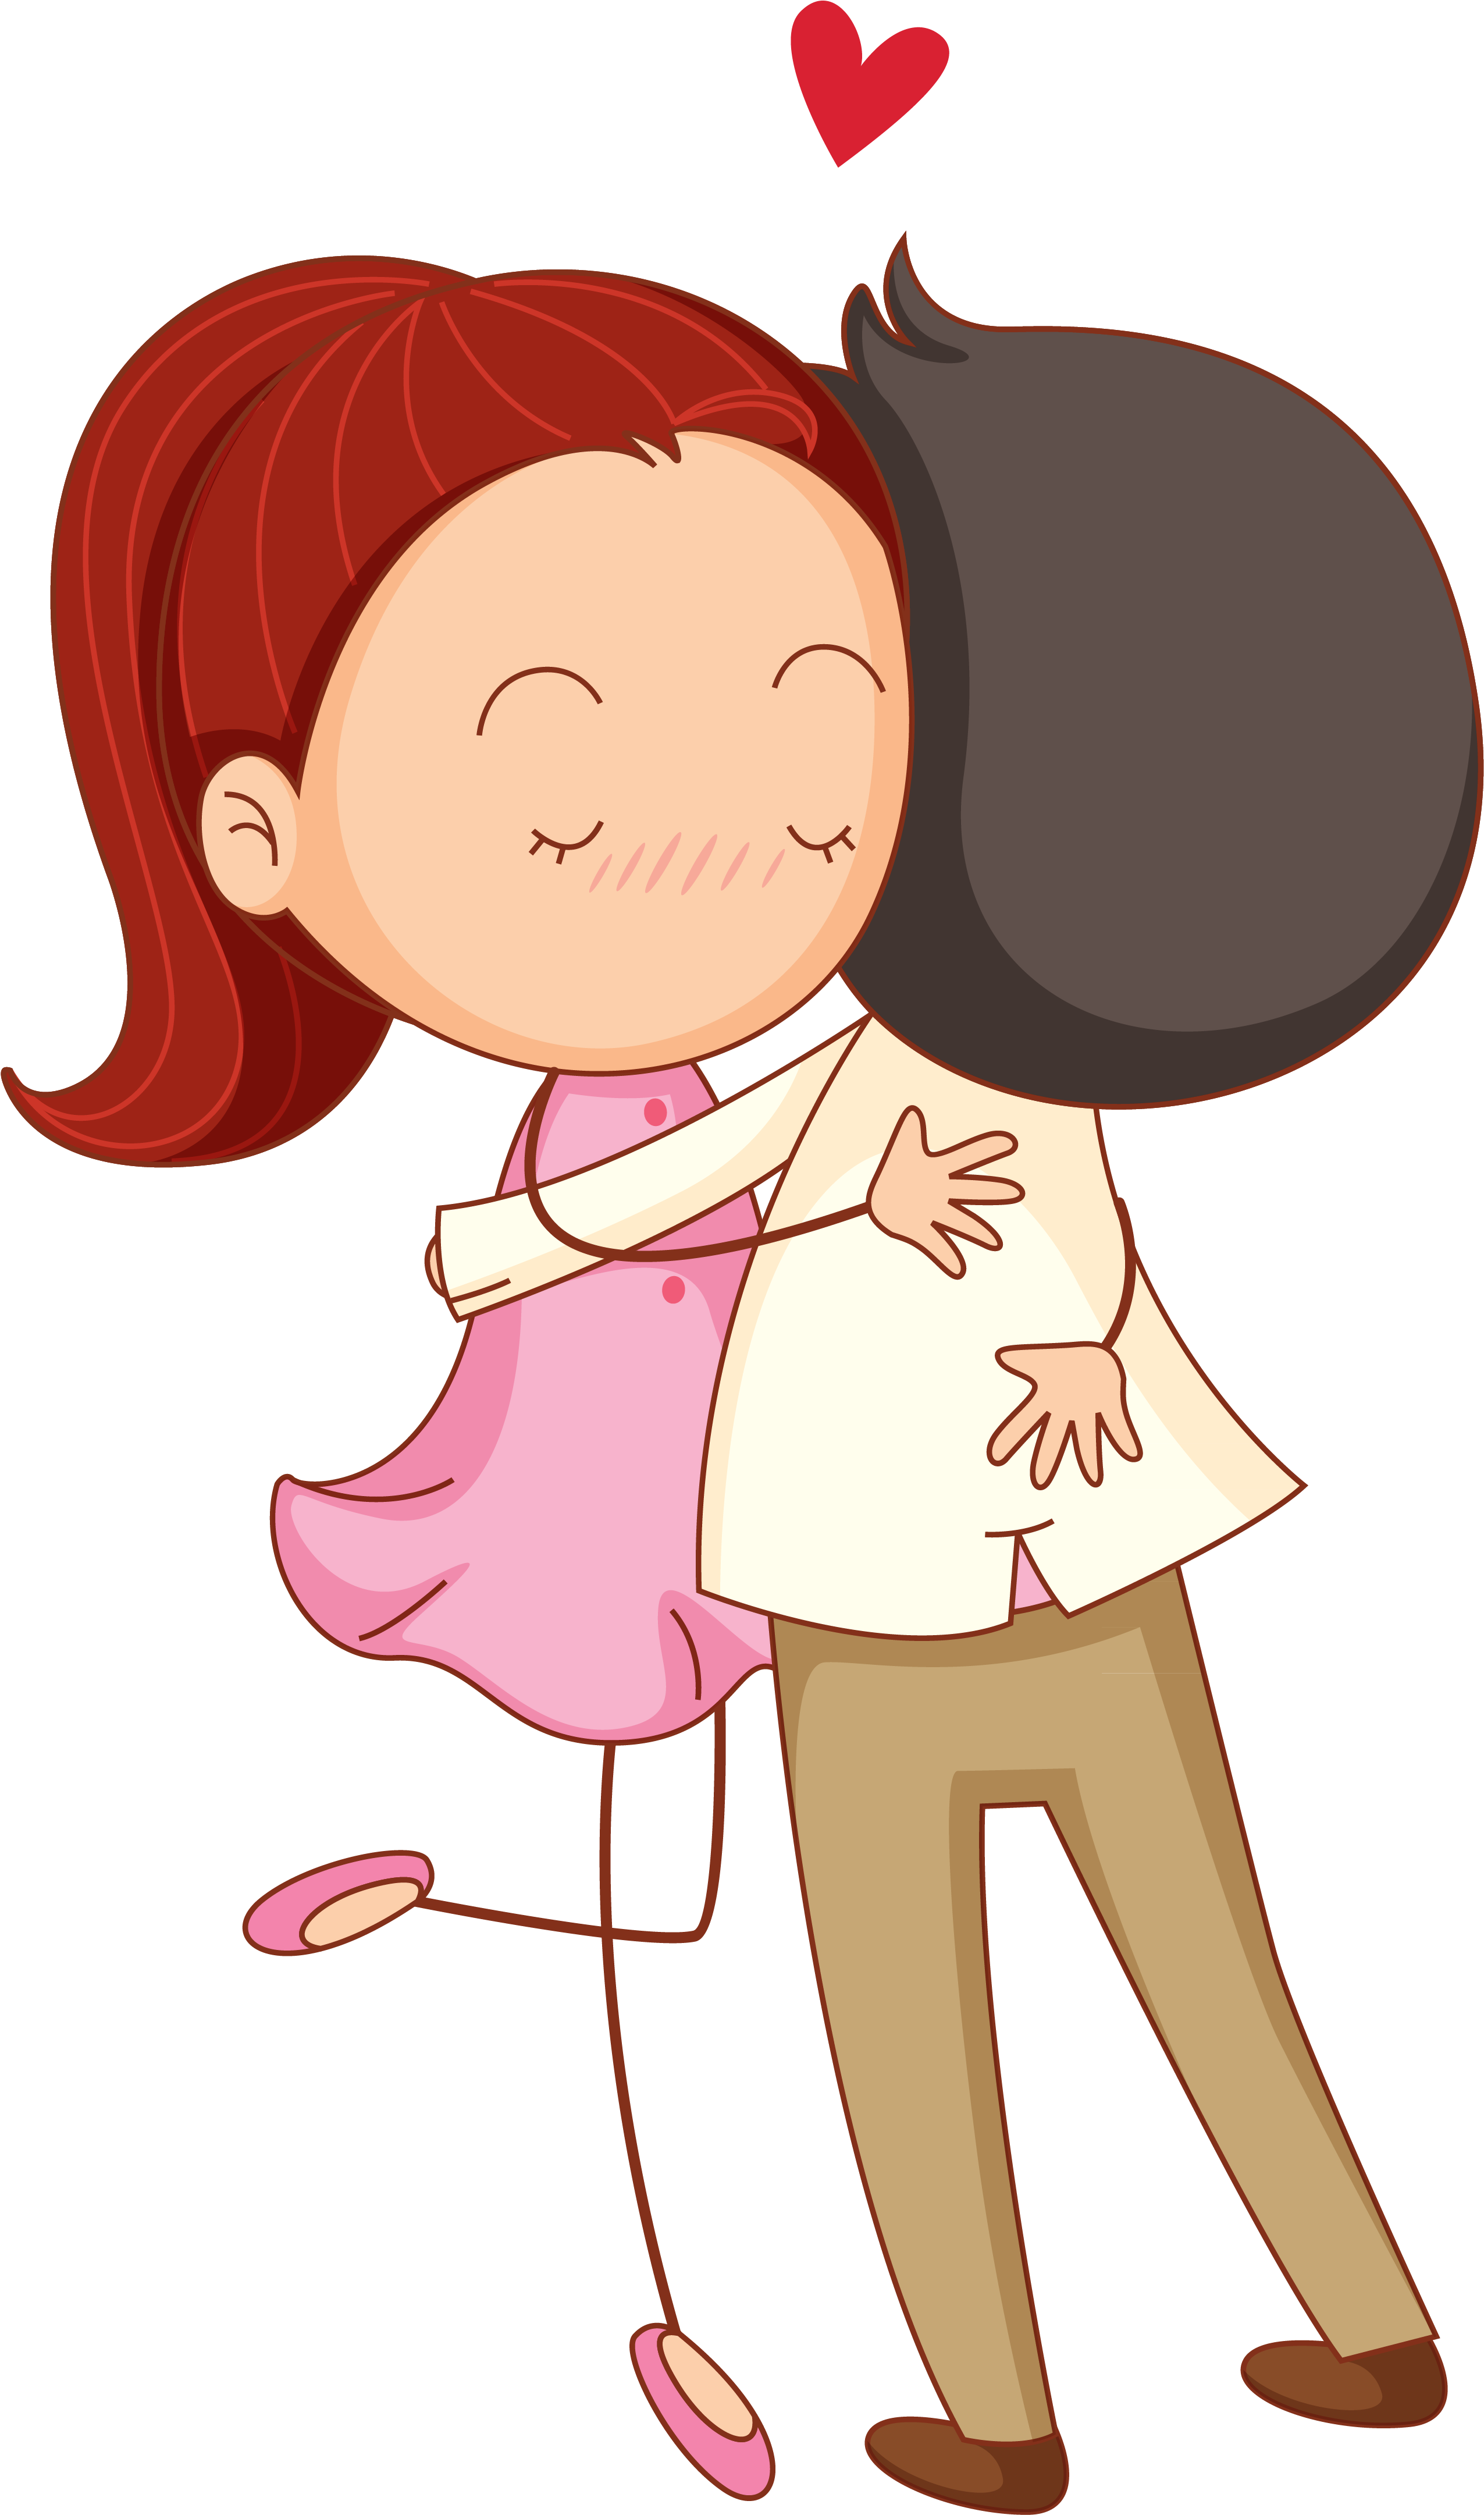 A Cartoon Of A Man And A Woman Hugging